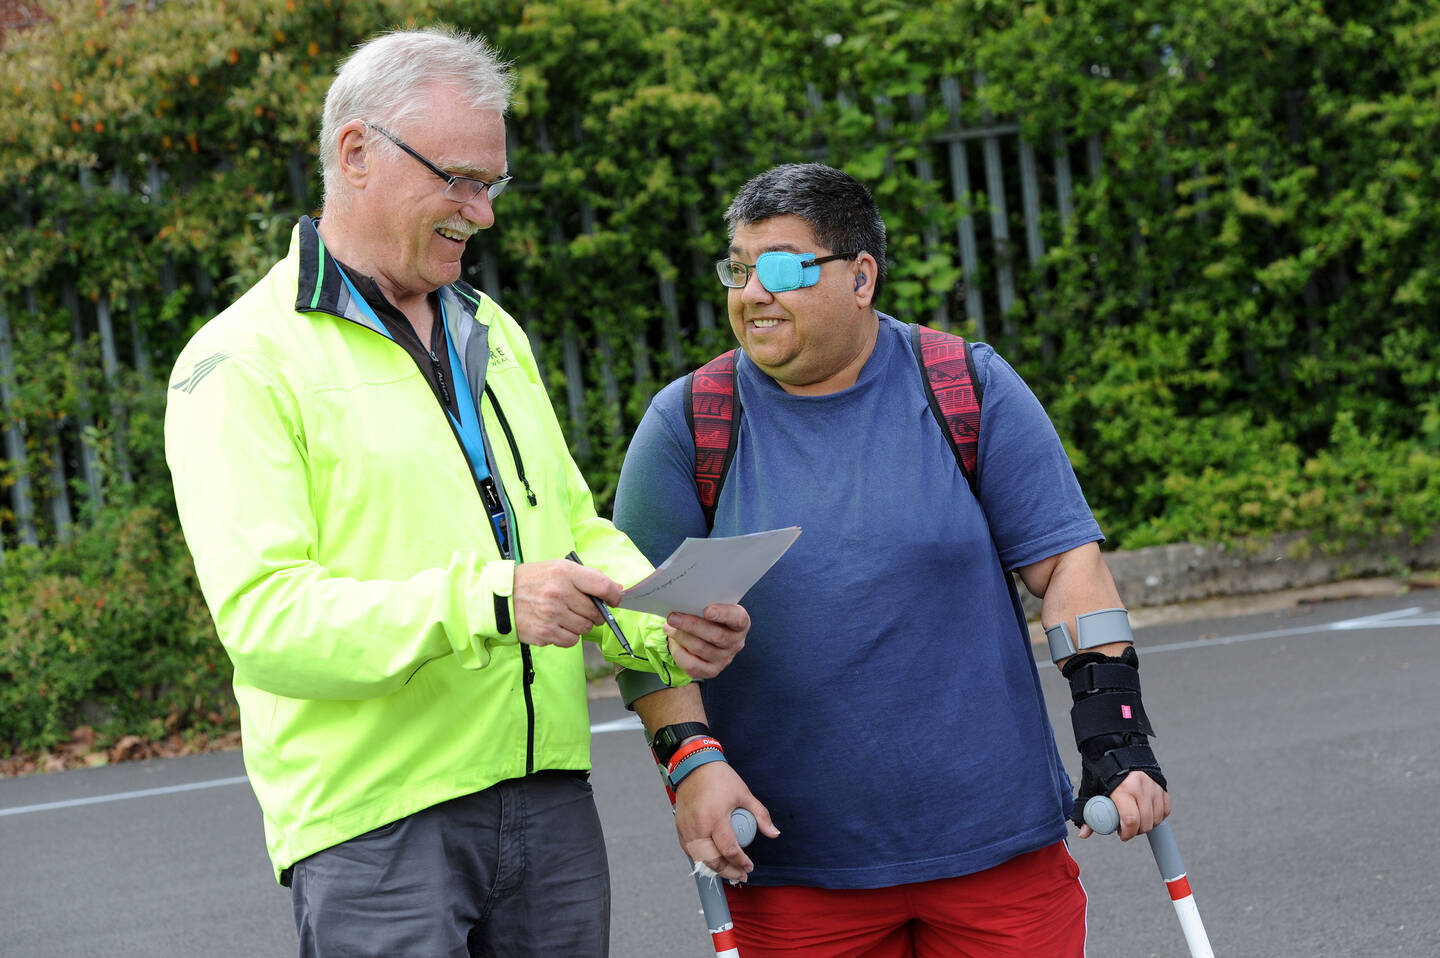 Volunteer supporting man with sight loss to be physically active